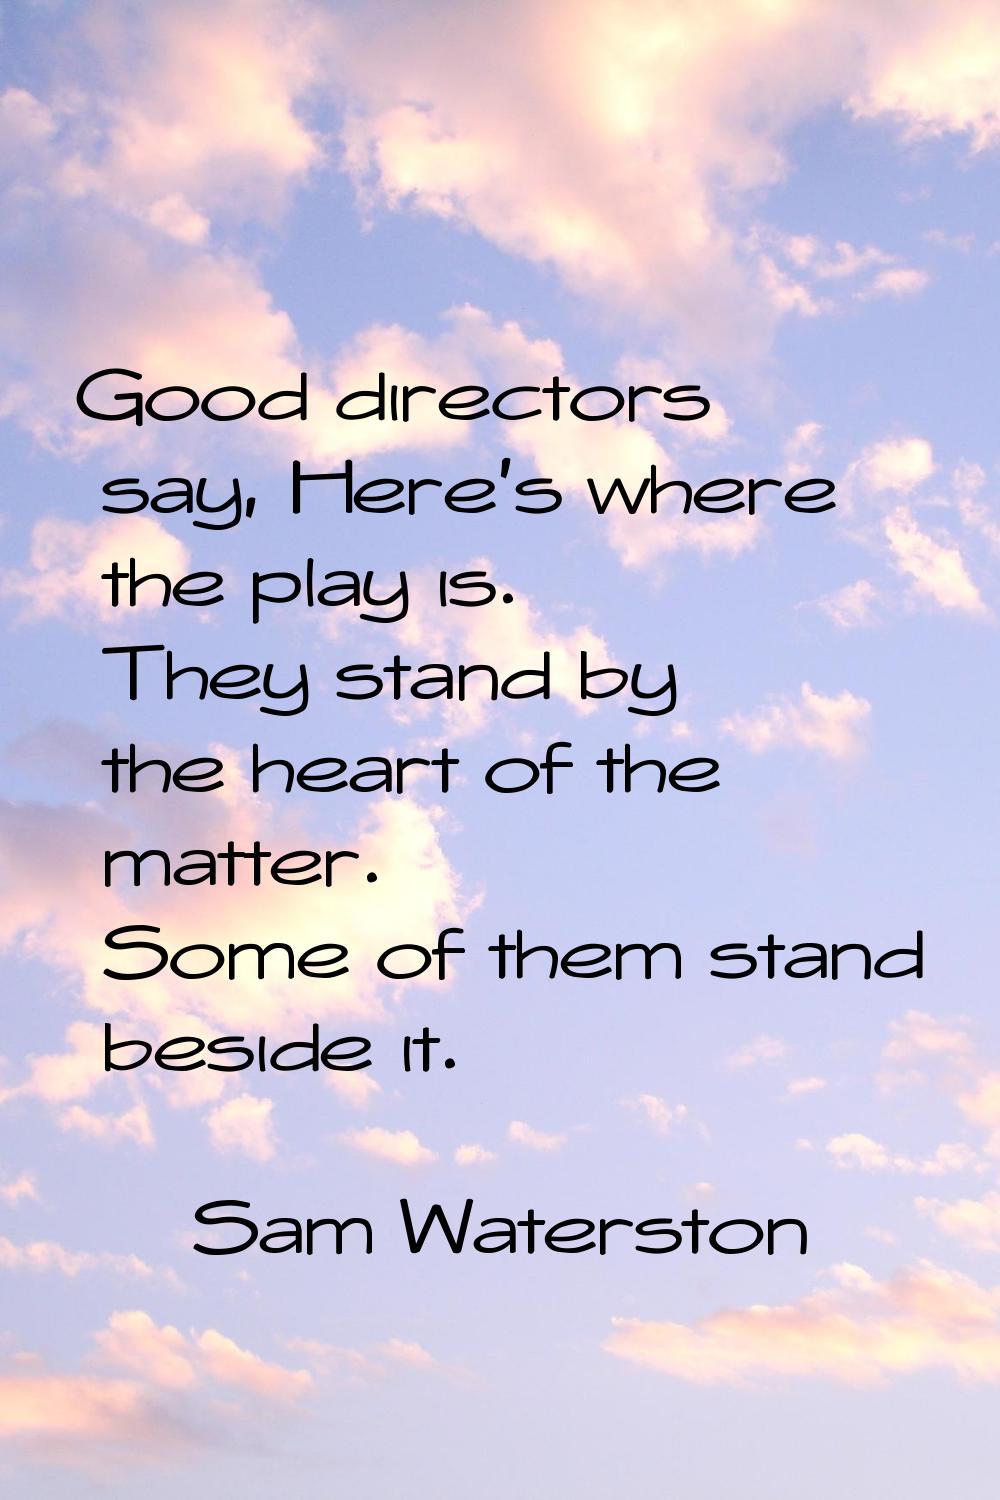 Good directors say, Here's where the play is. They stand by the heart of the matter. Some of them s